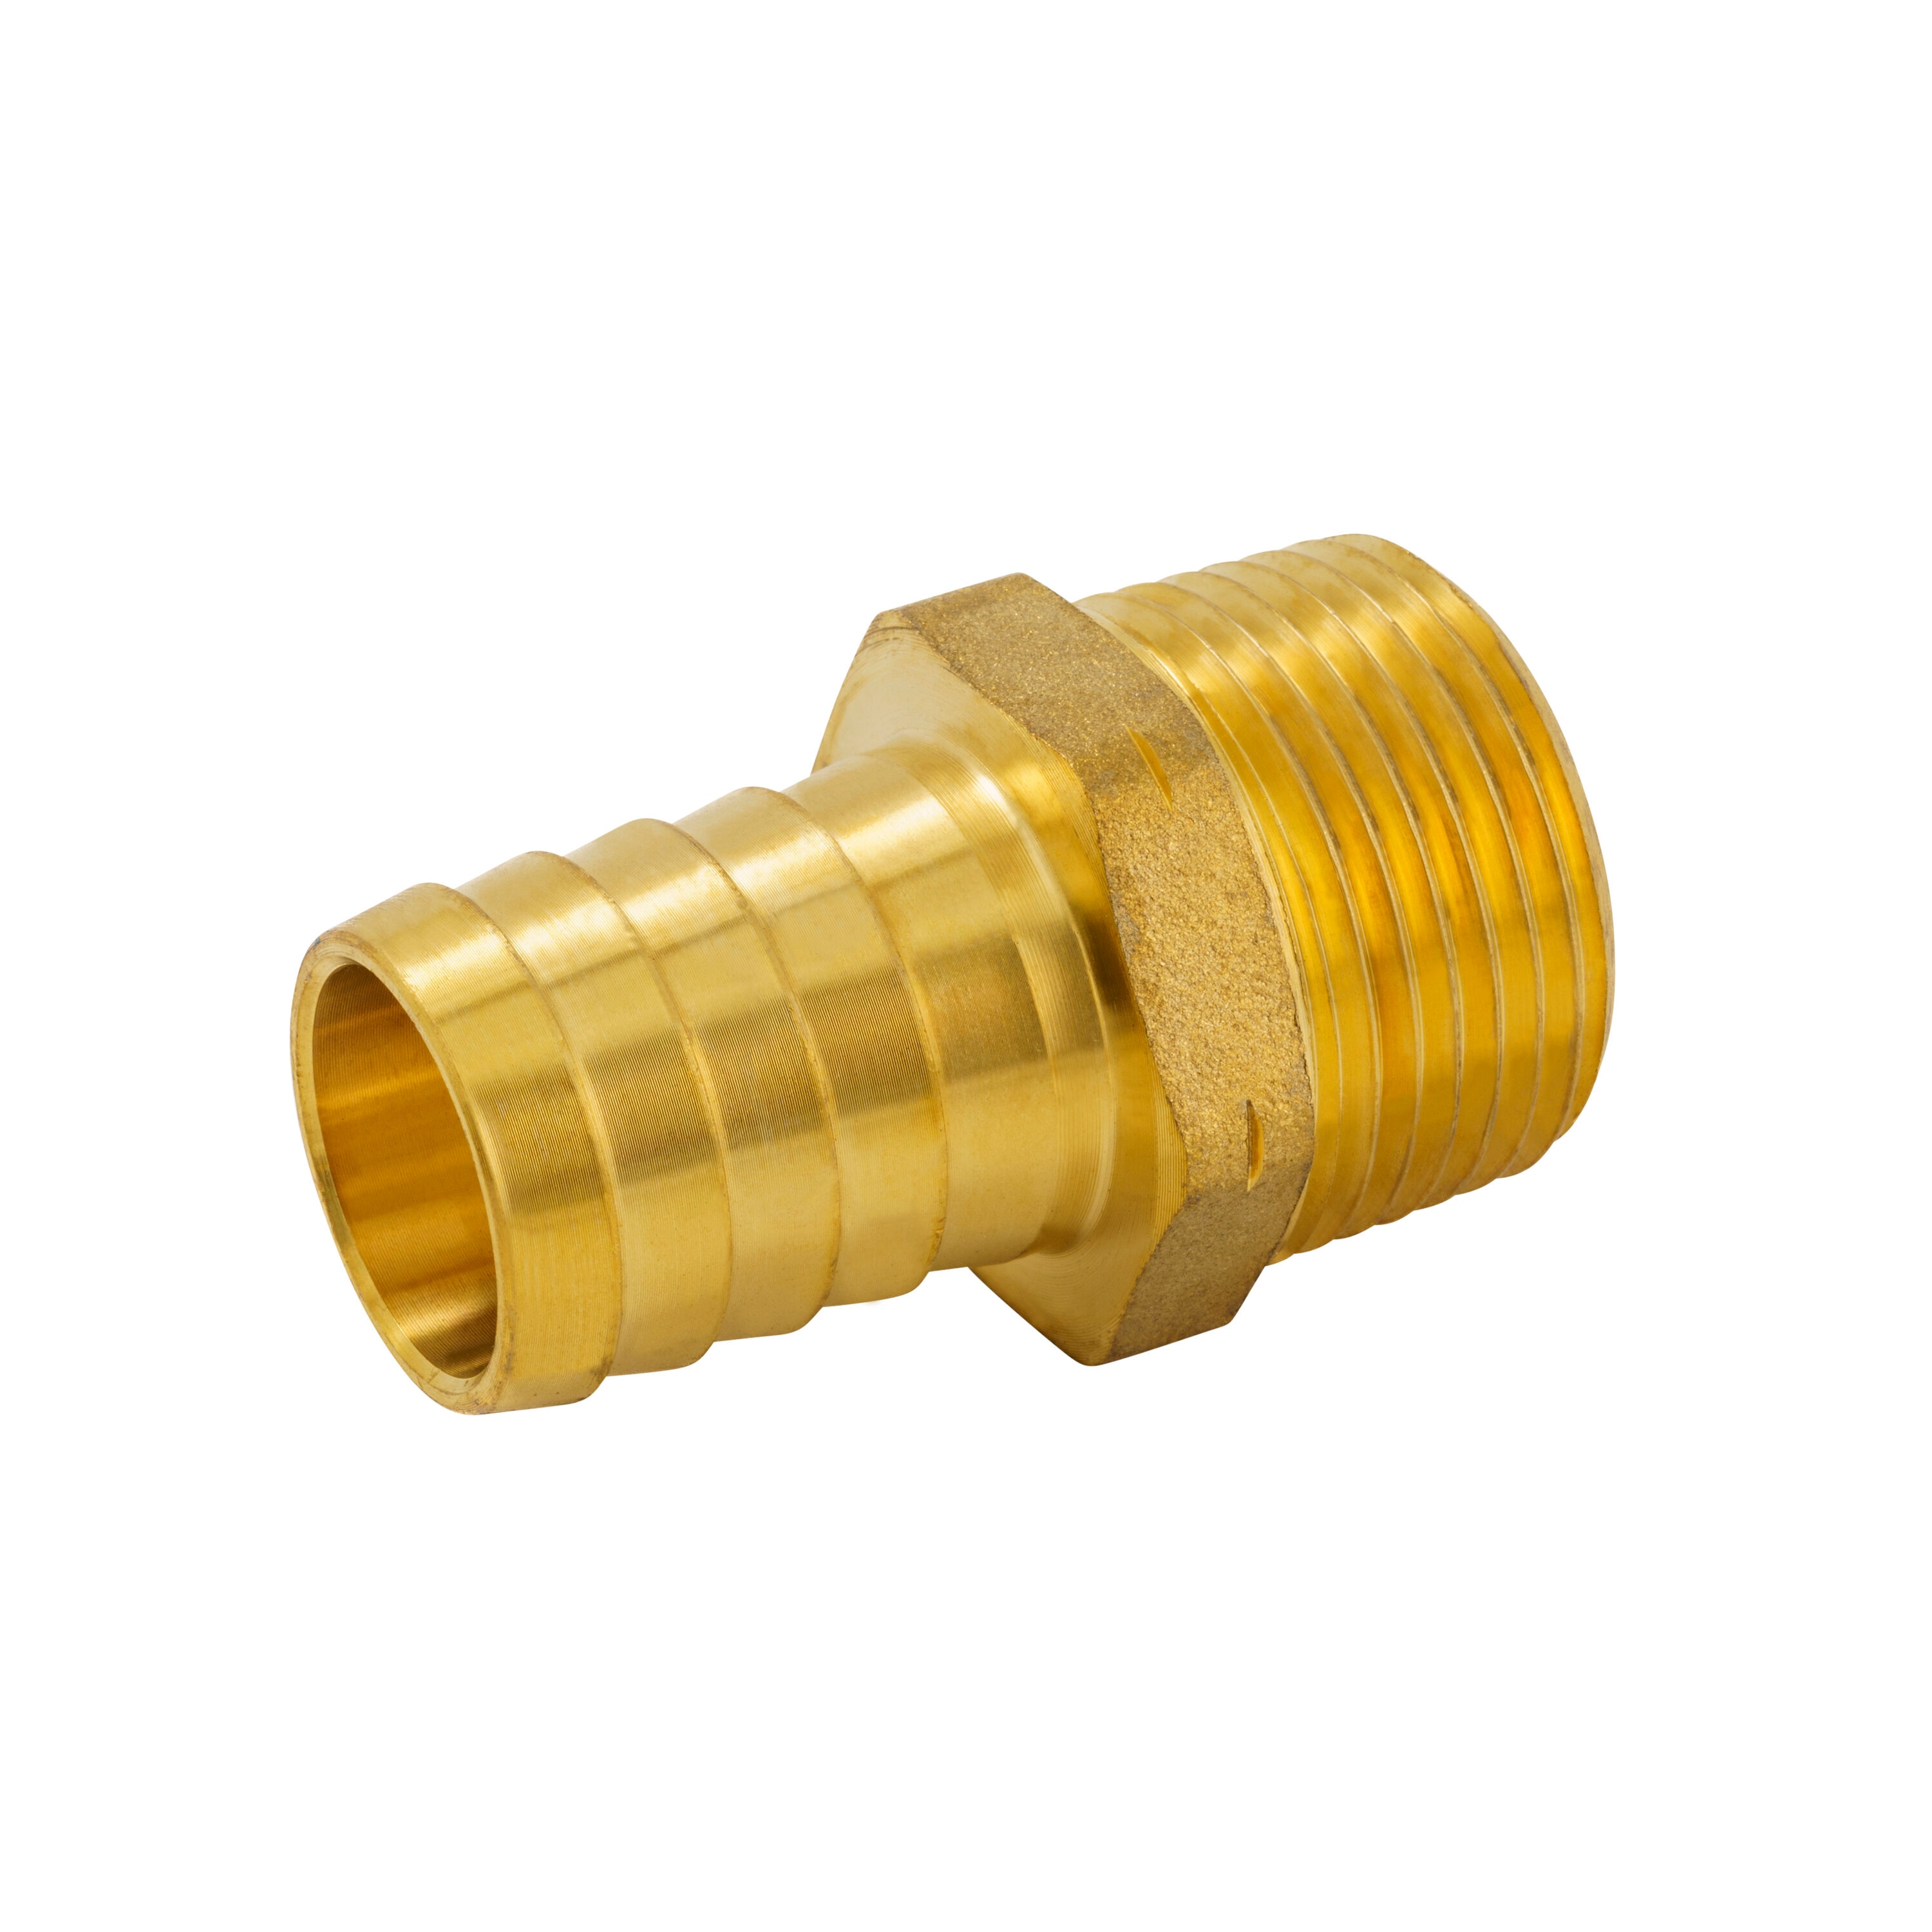 Proline Series 3/4-in x 3/4-in Barbed Adapter Fitting in the Brass